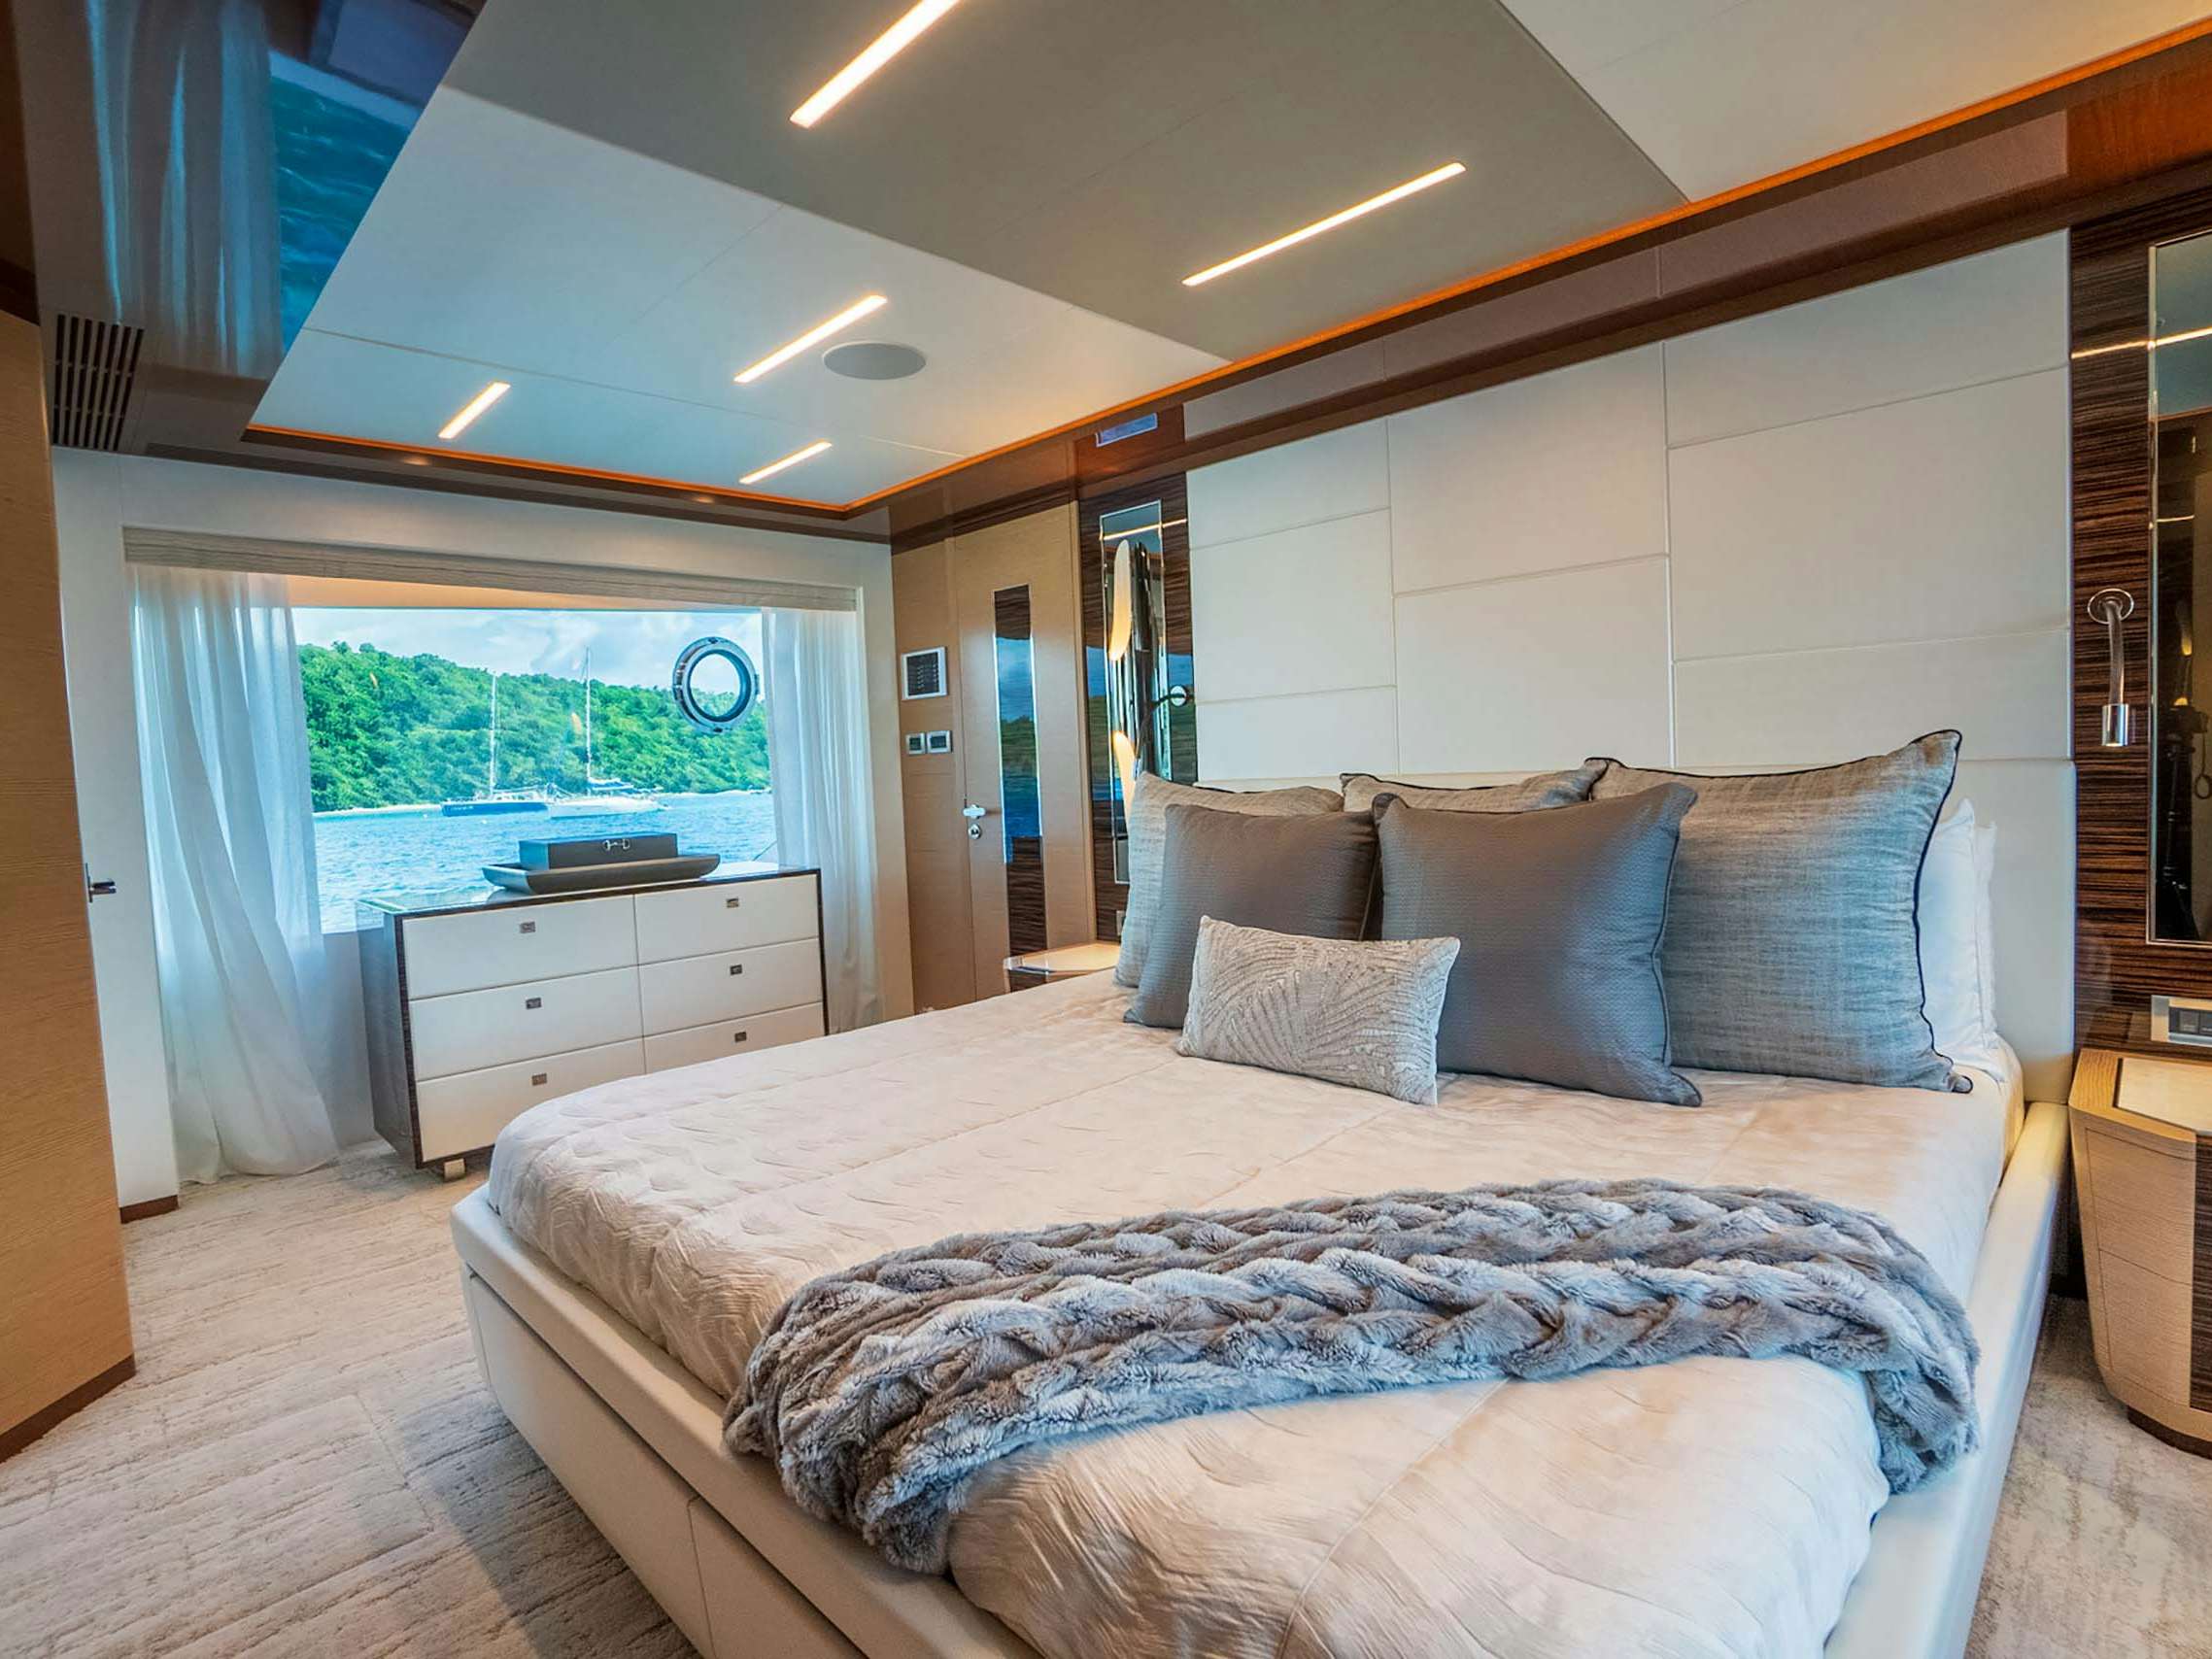 Master stateroom on a 6 to 8 guest charter yacht with king bed and a large window looking out the ocean